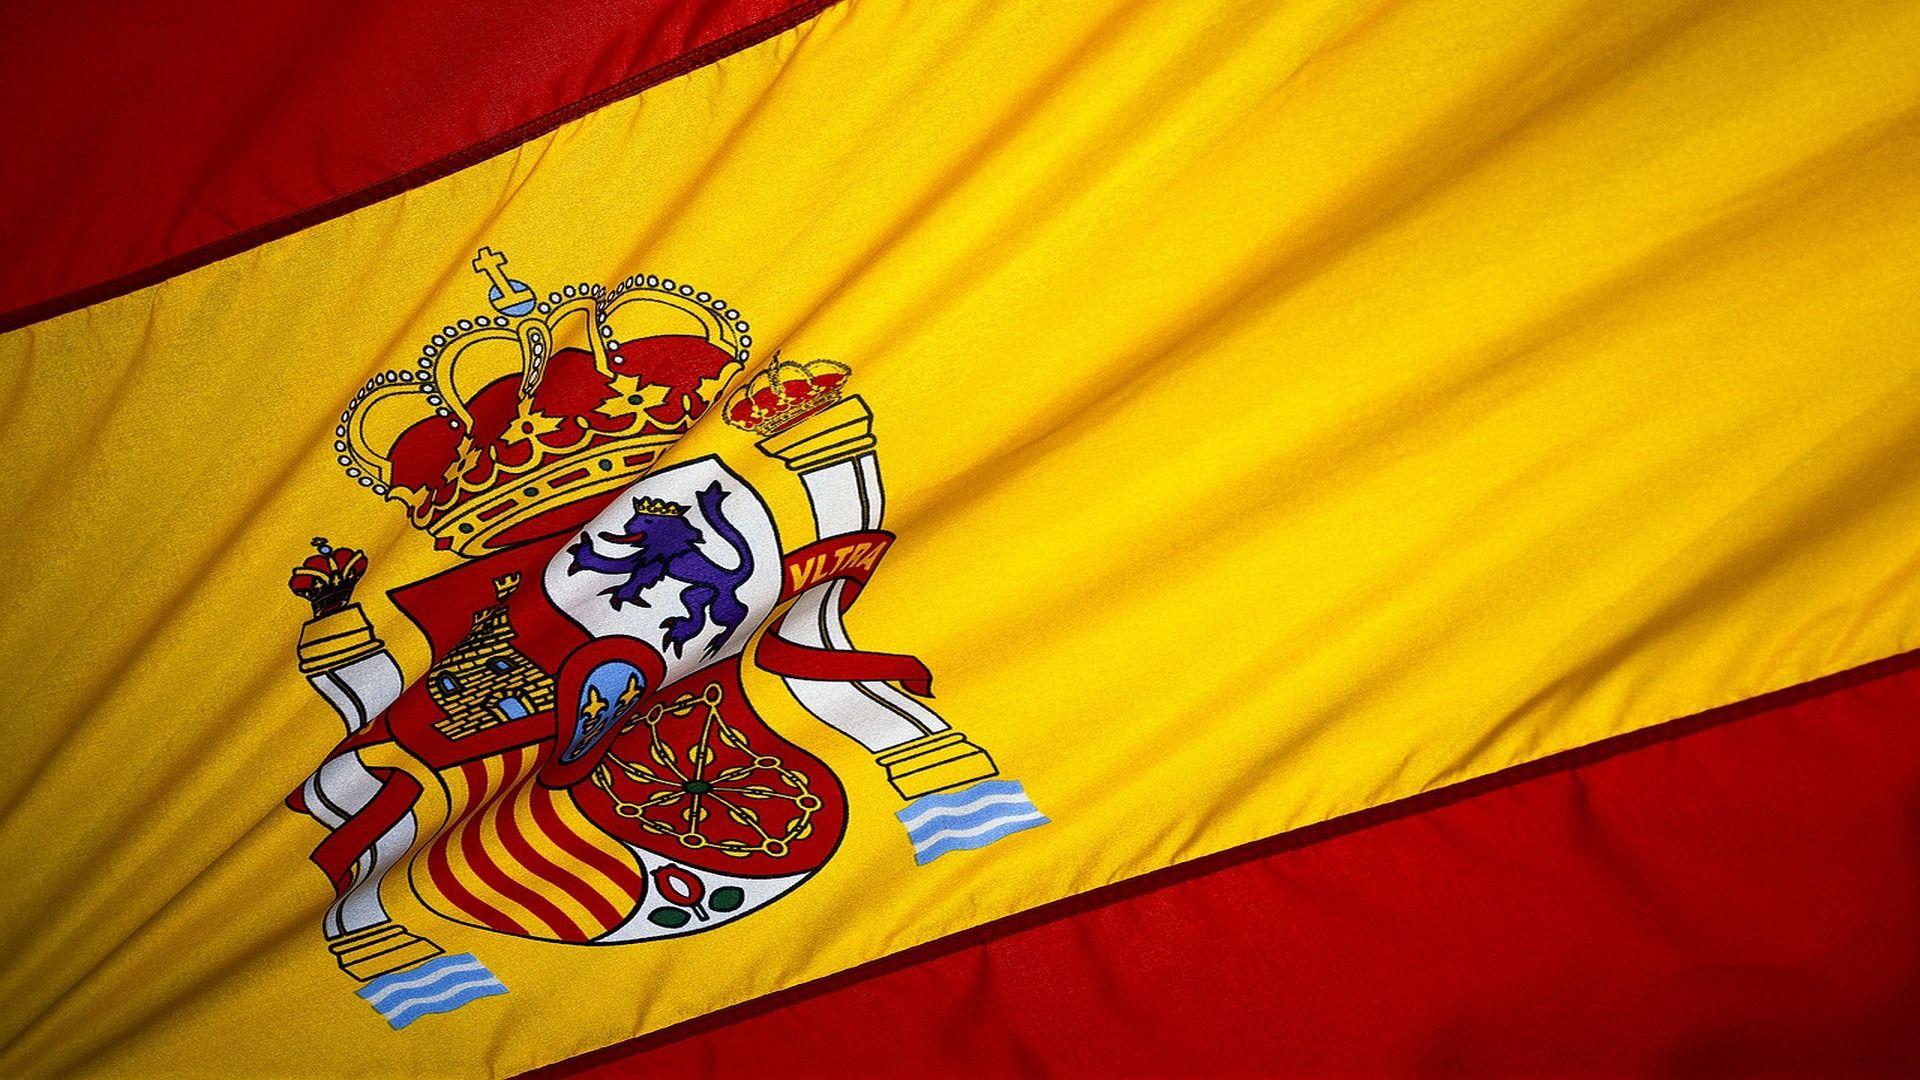 Uncategorized Background In High Quality: Spain